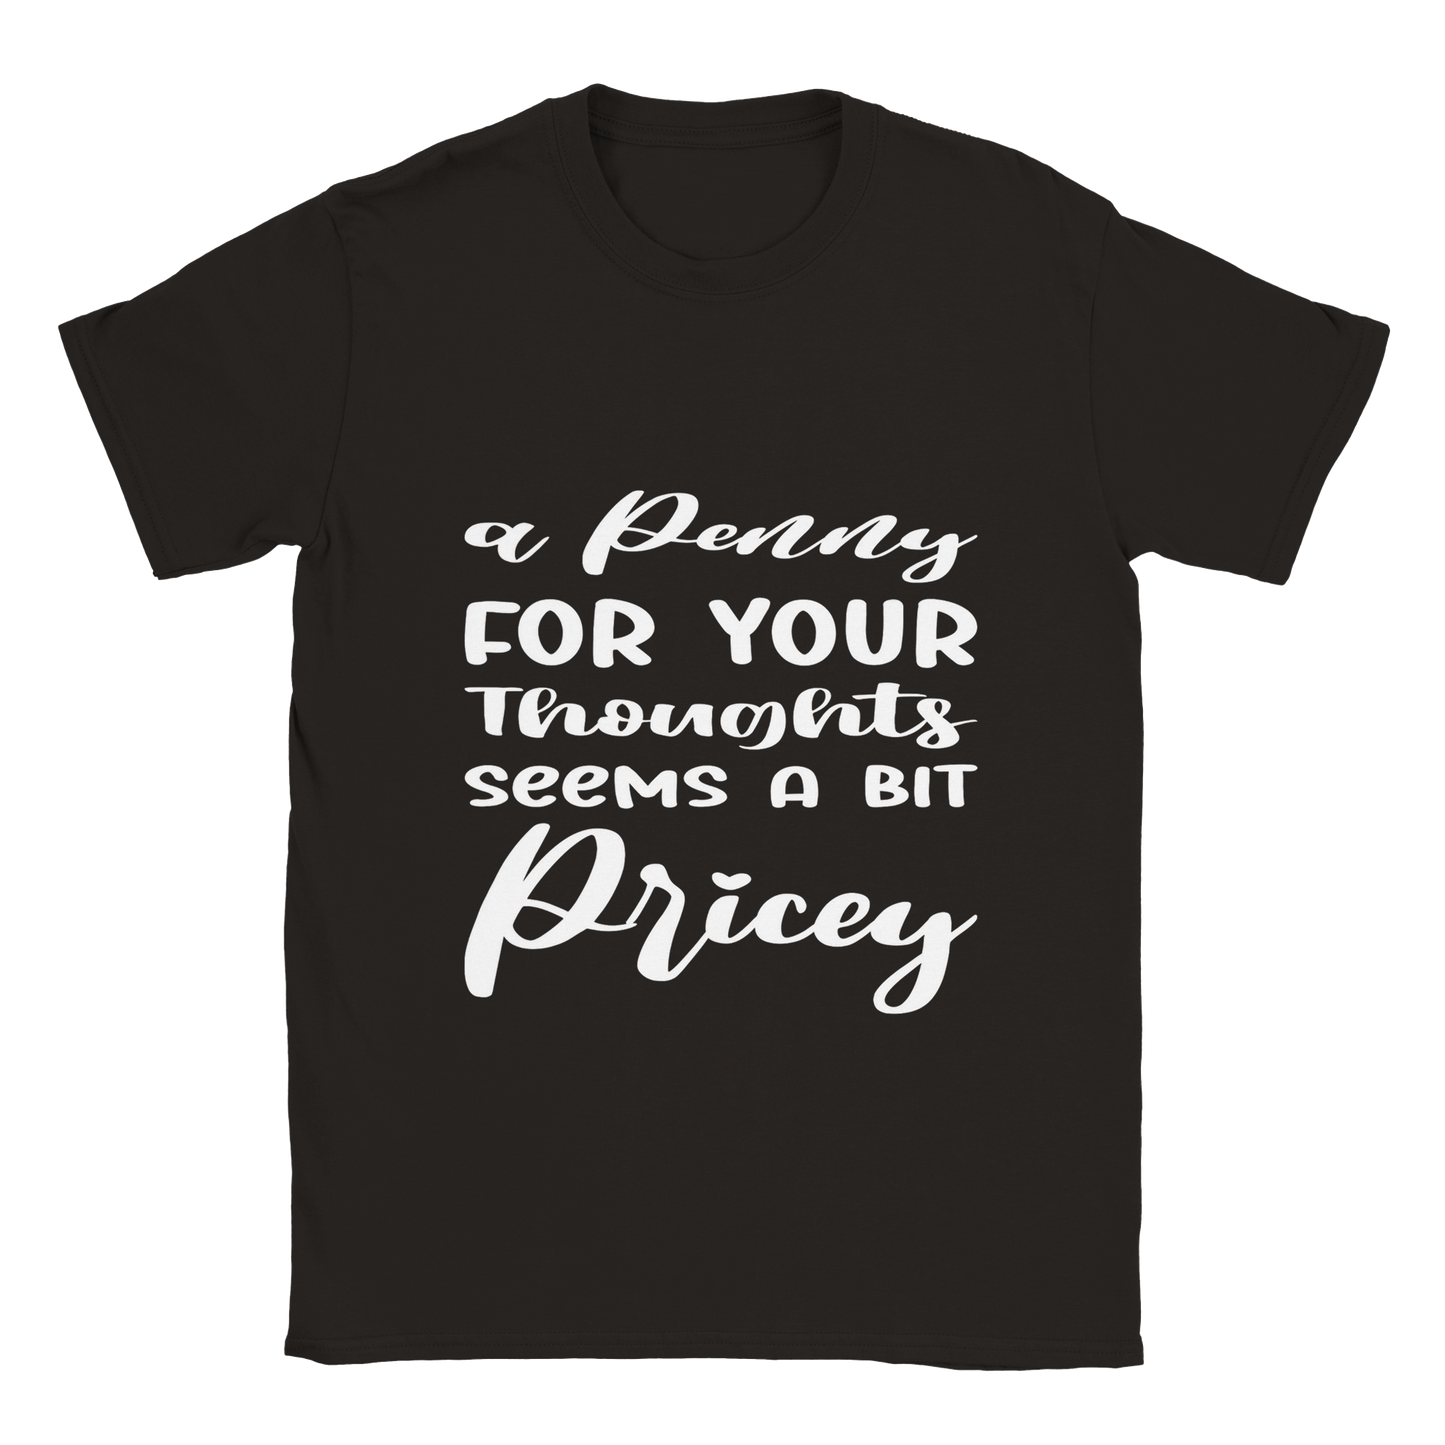 Penny for your thoughts Sarcasm Shirt - Classic Unisex Crewneck T-shirt